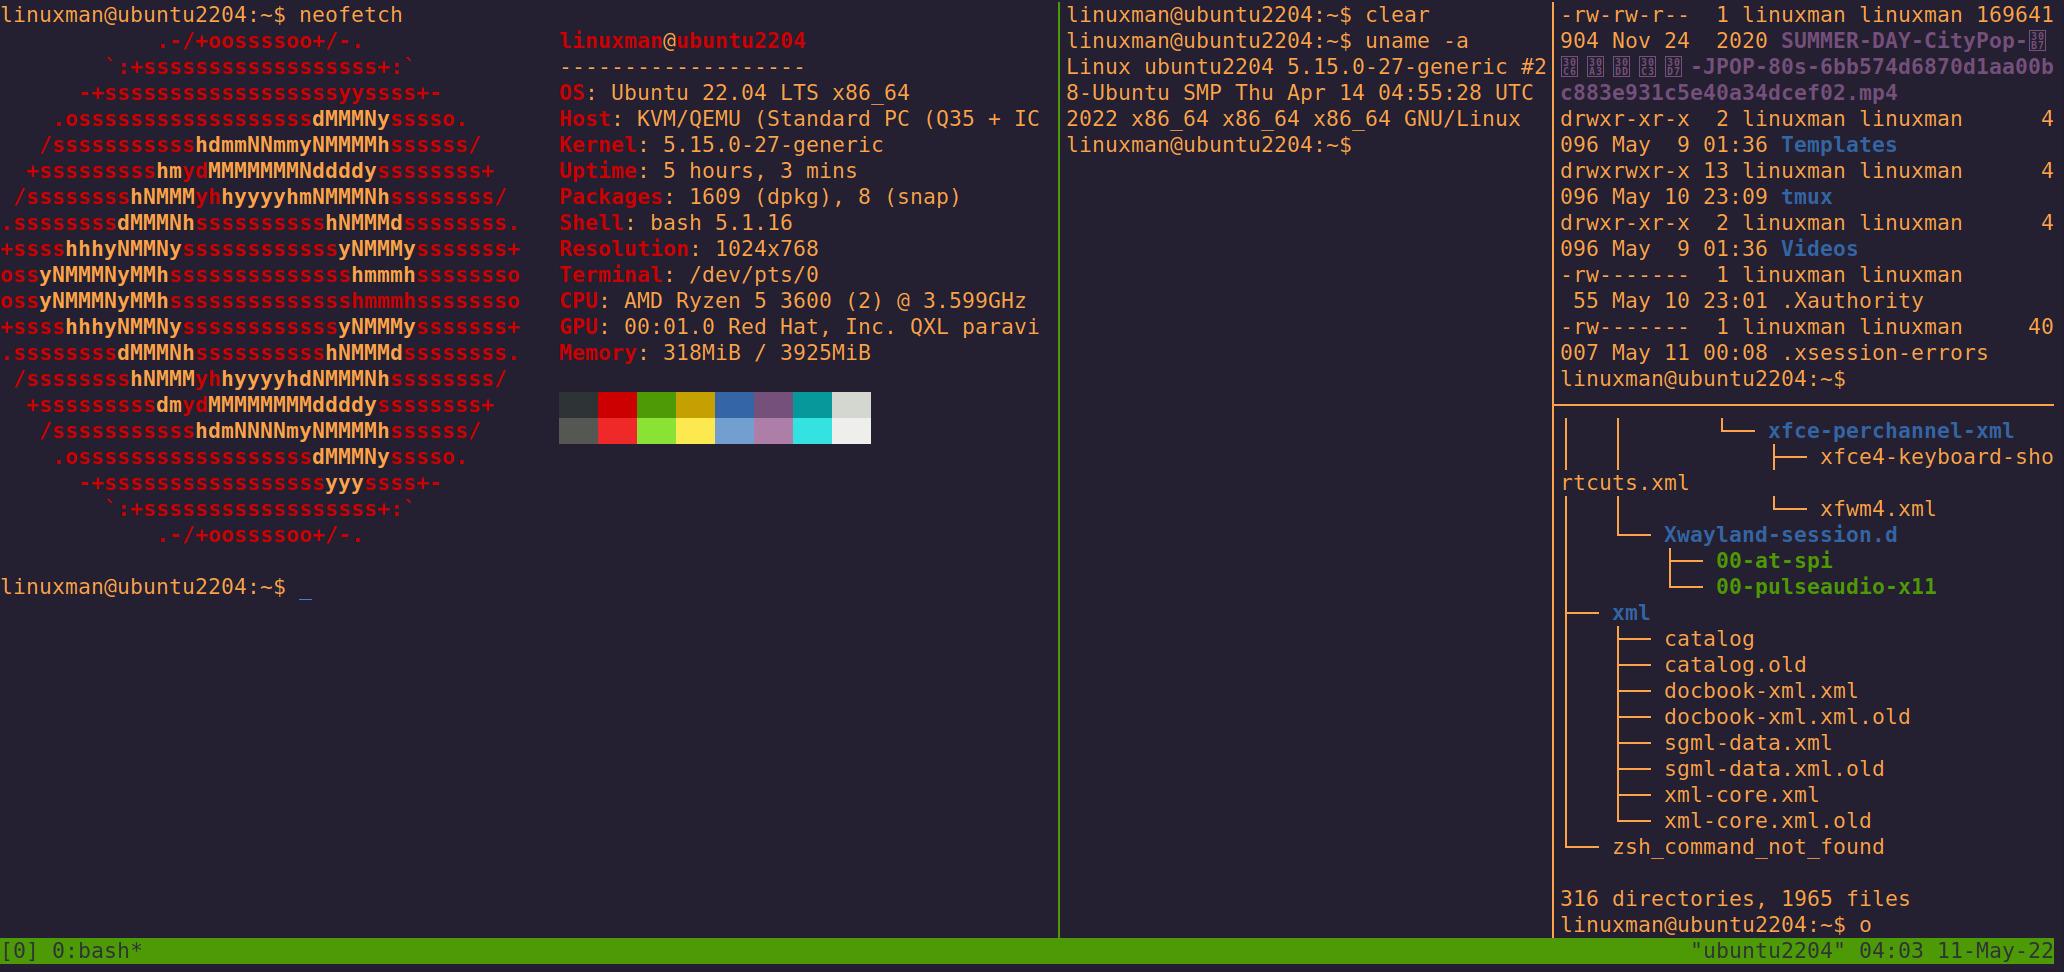 tmux lets you create multiple terminals in one